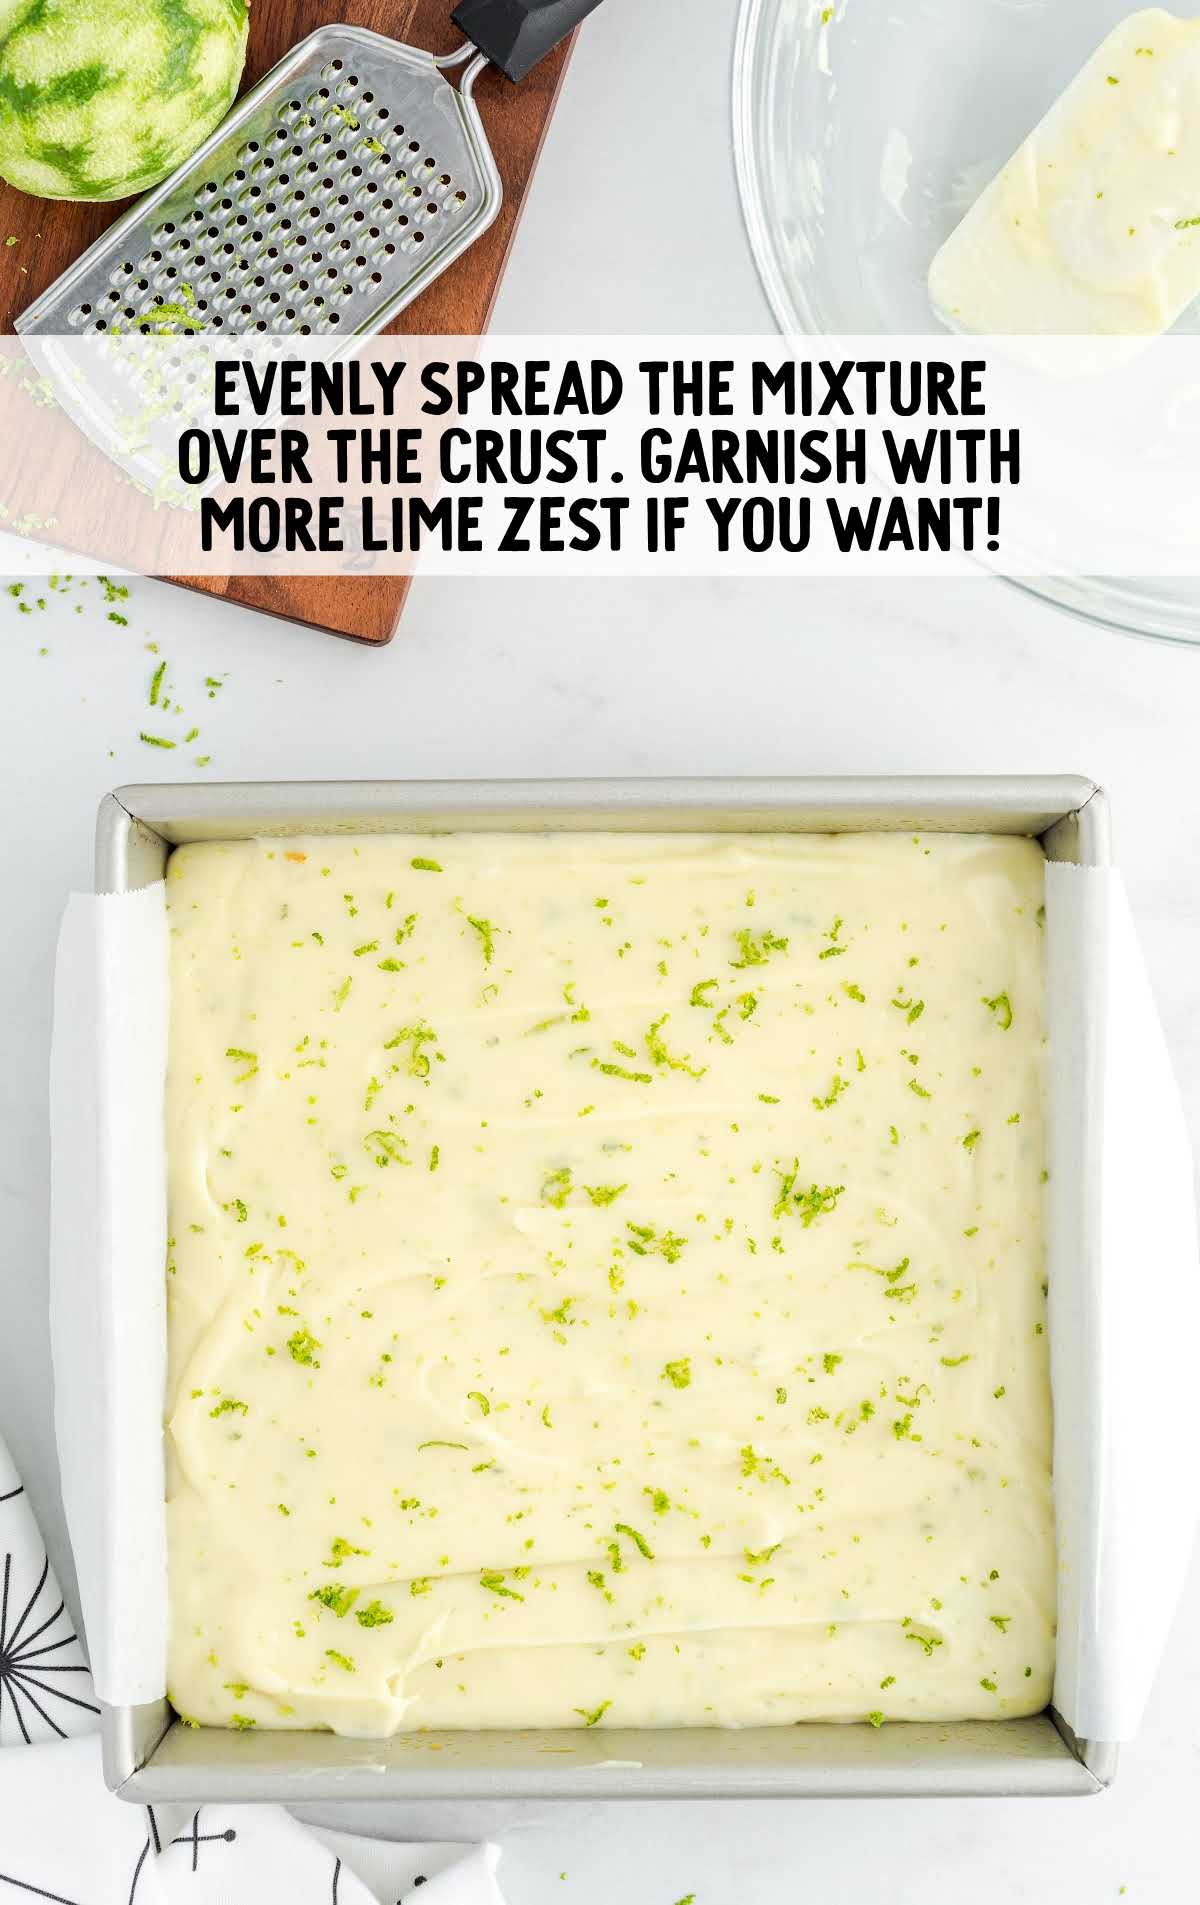 lime juice mixture spread over the crust in a baking dish